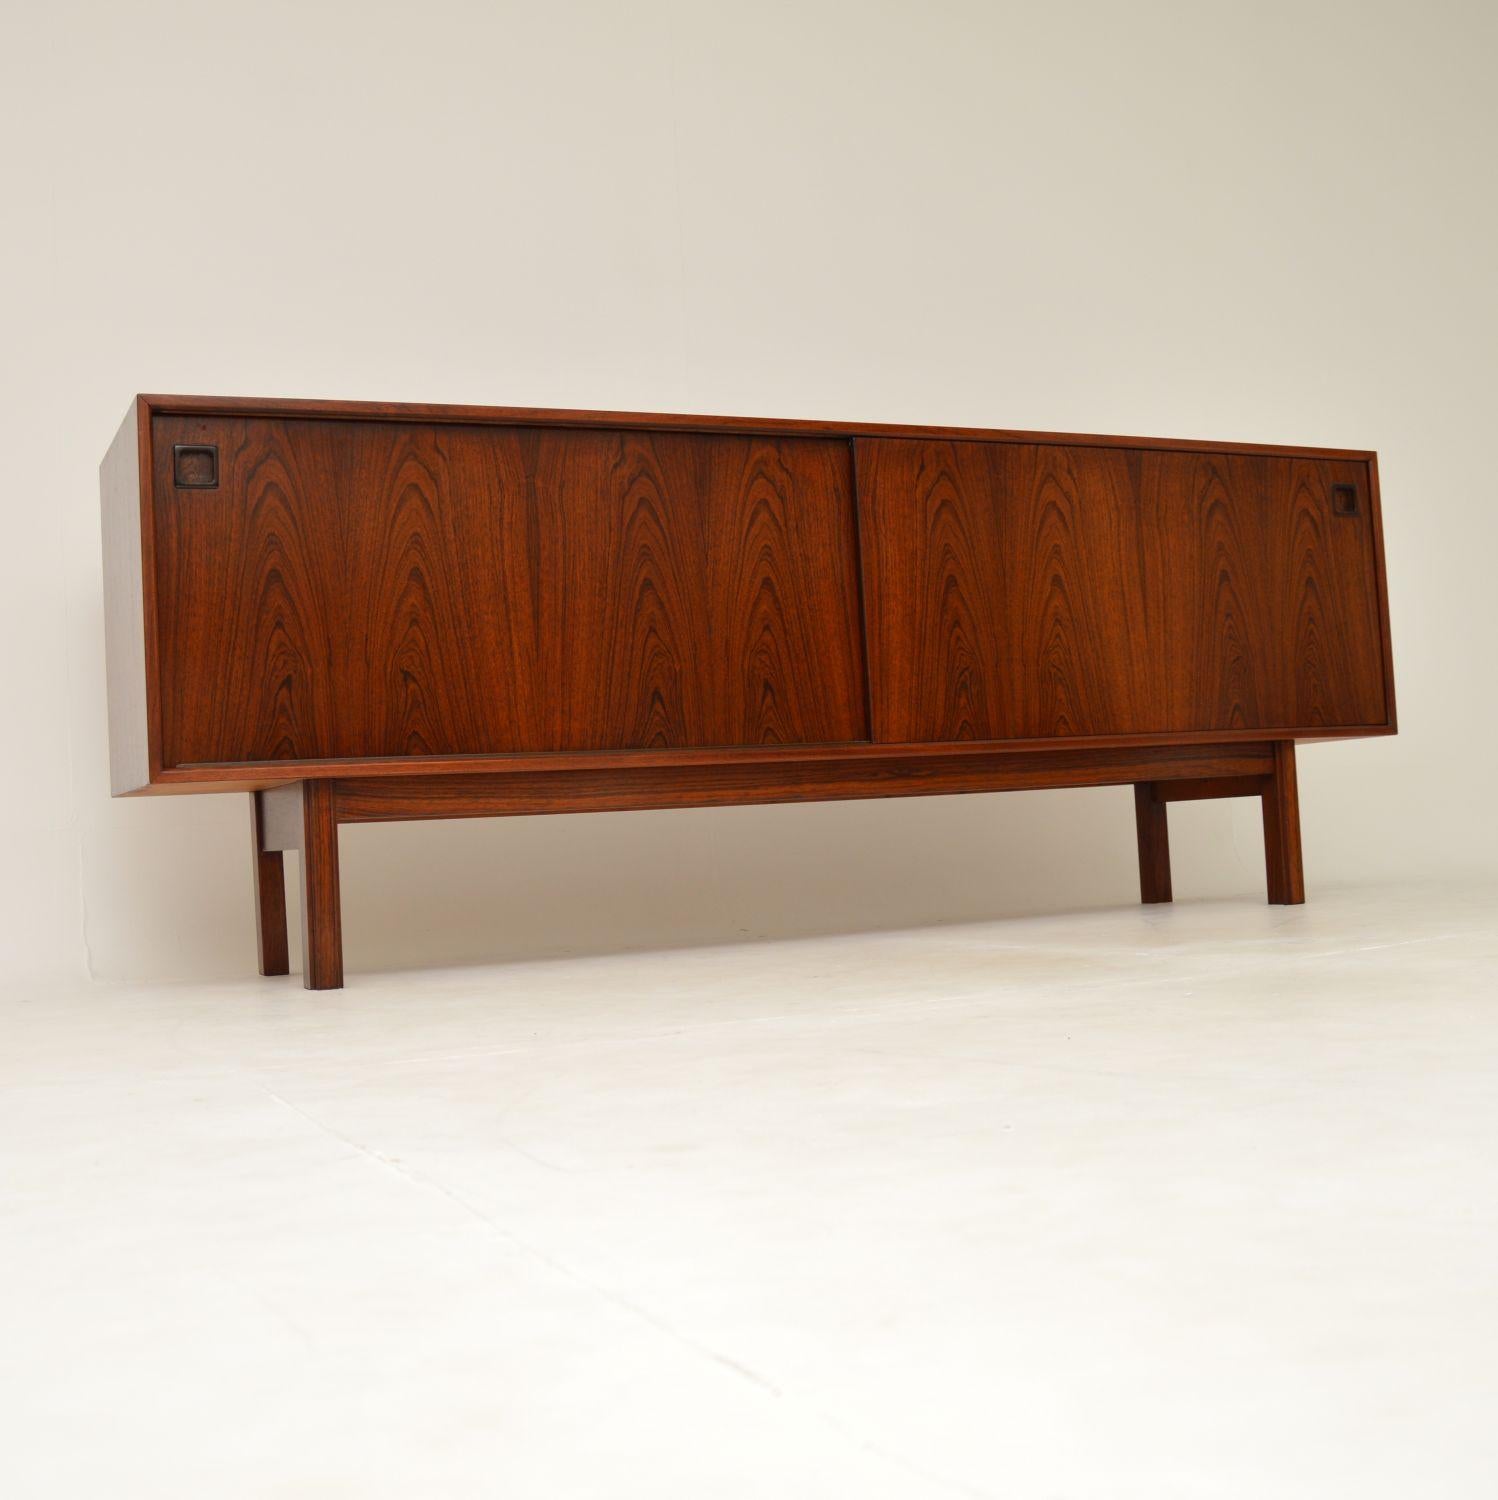 An outstanding Danish vintage sideboard in wood. This is the model 21 sideboard, designed by Gunni Omann and made by Omann Junior; it dates from the 1960’s.

The quality is superb, this is beautifully made and has an extremely stylish design. The